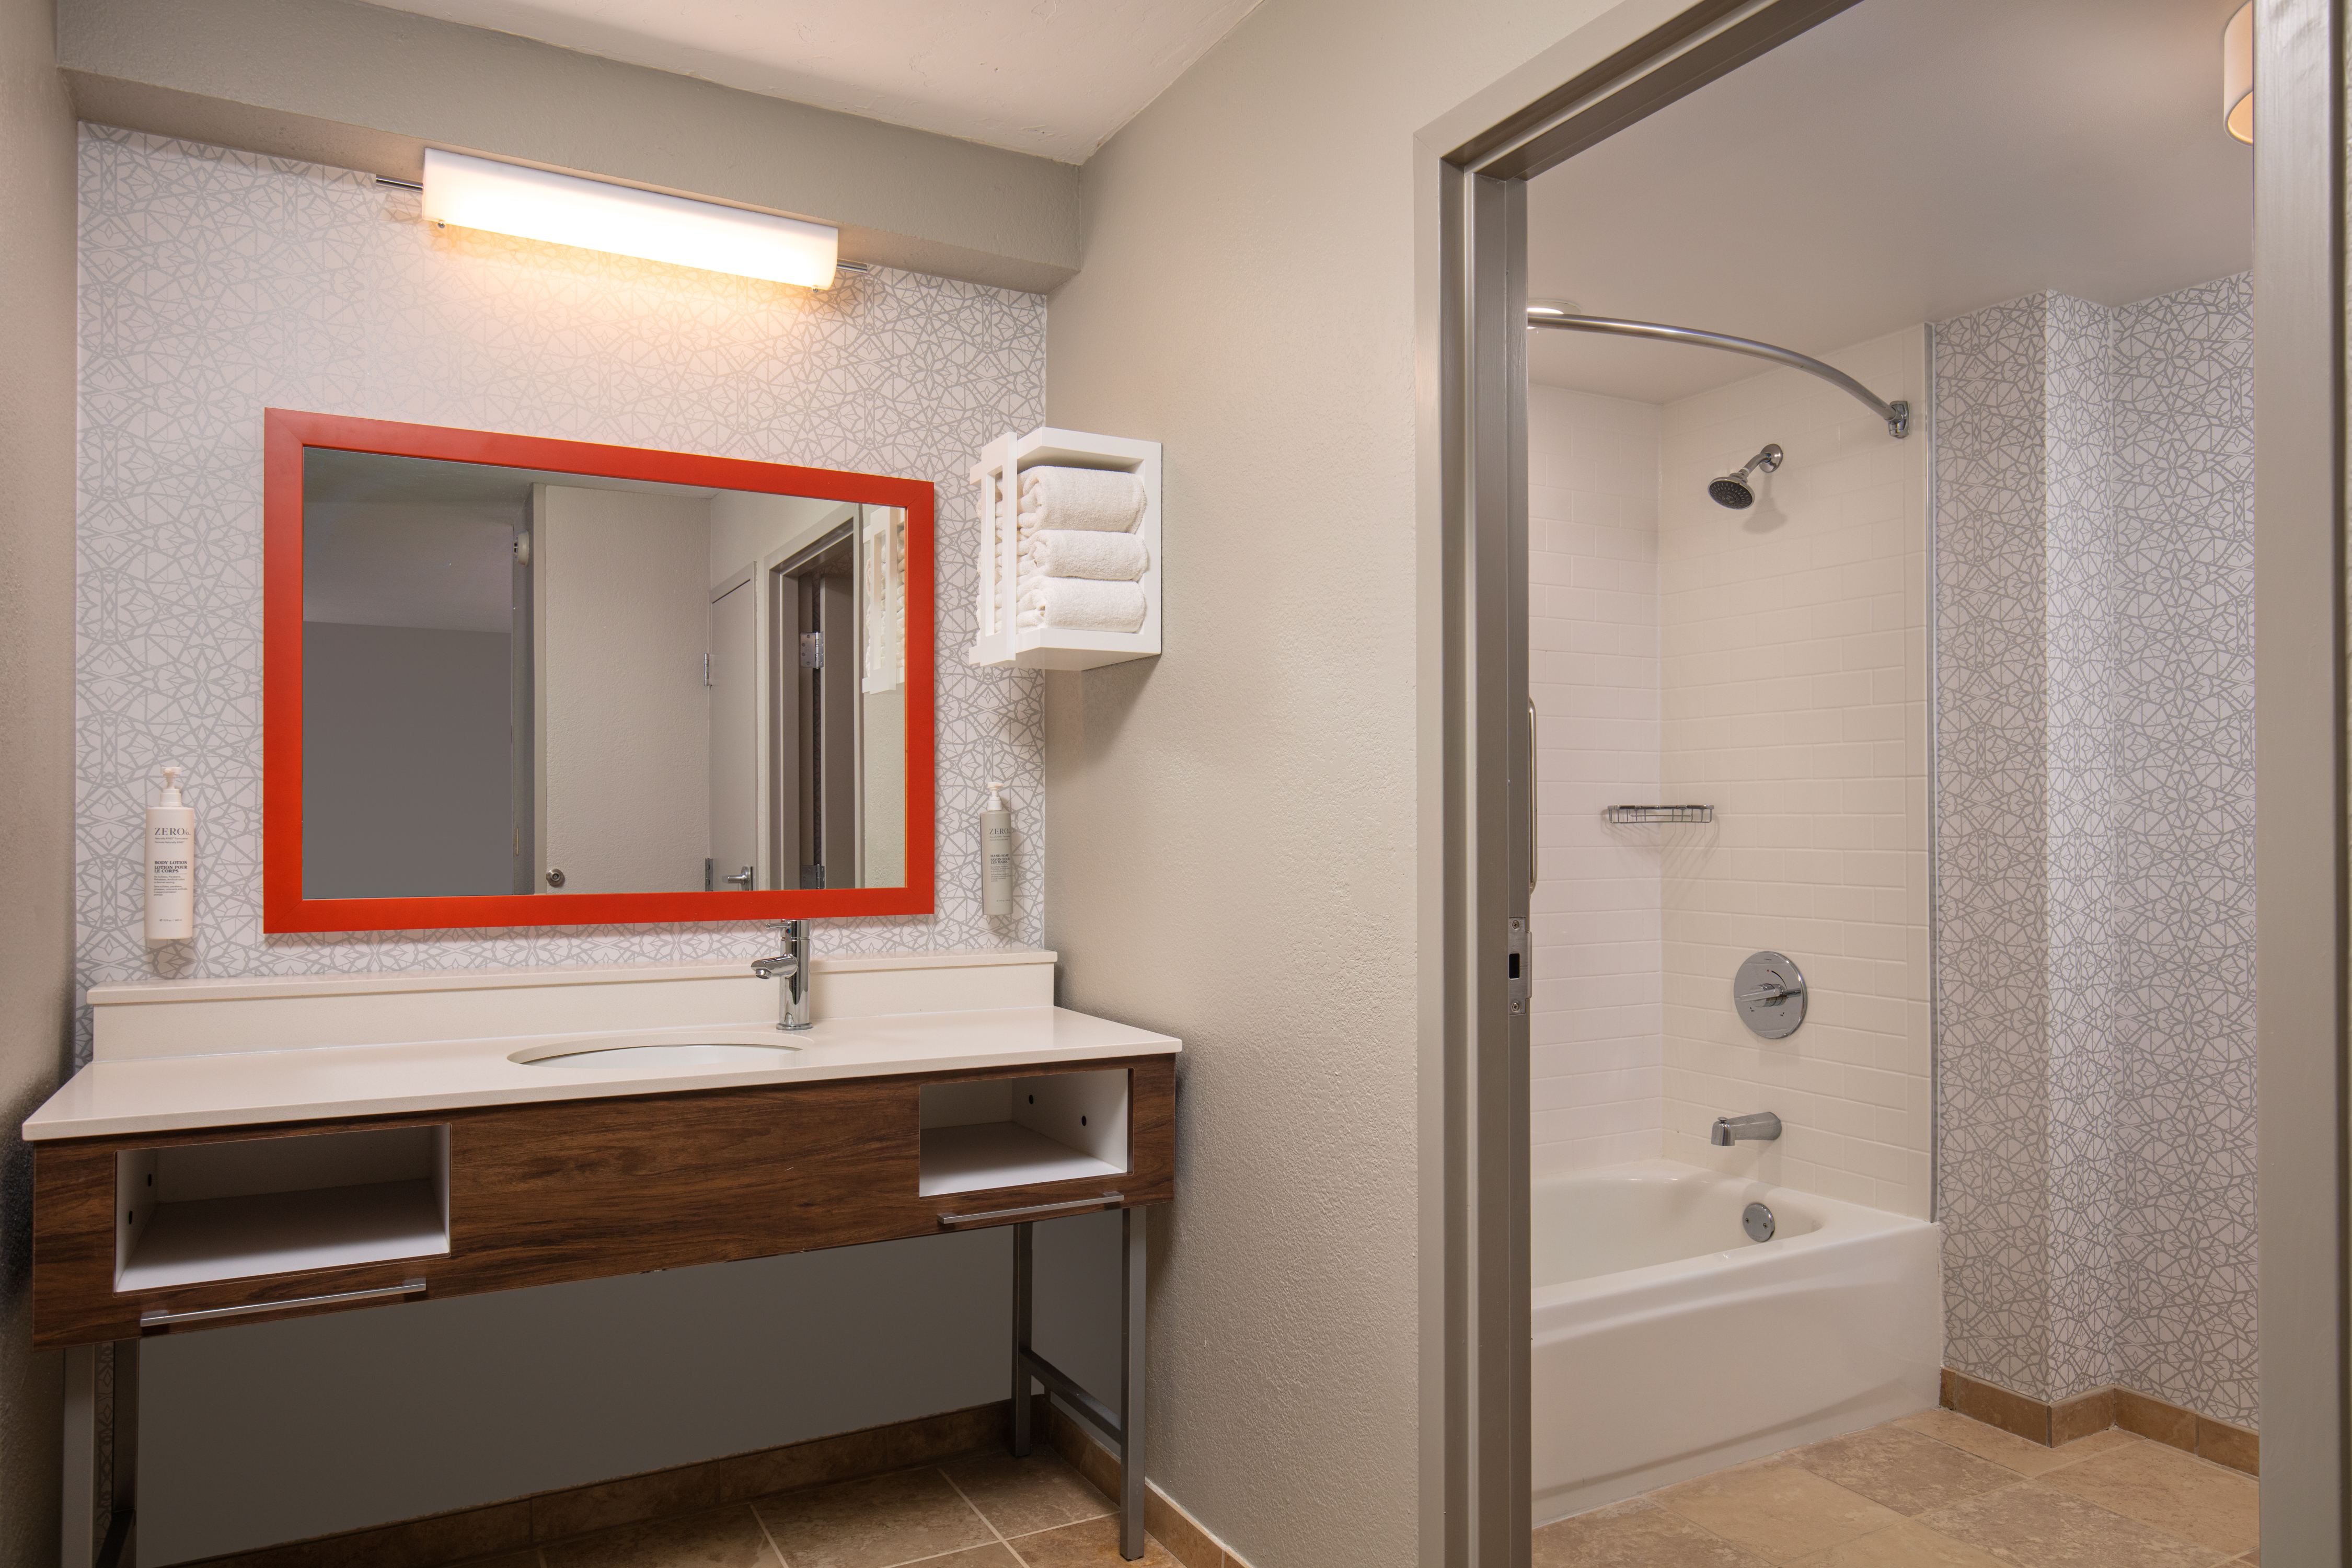 Suite Bathroom With Tub